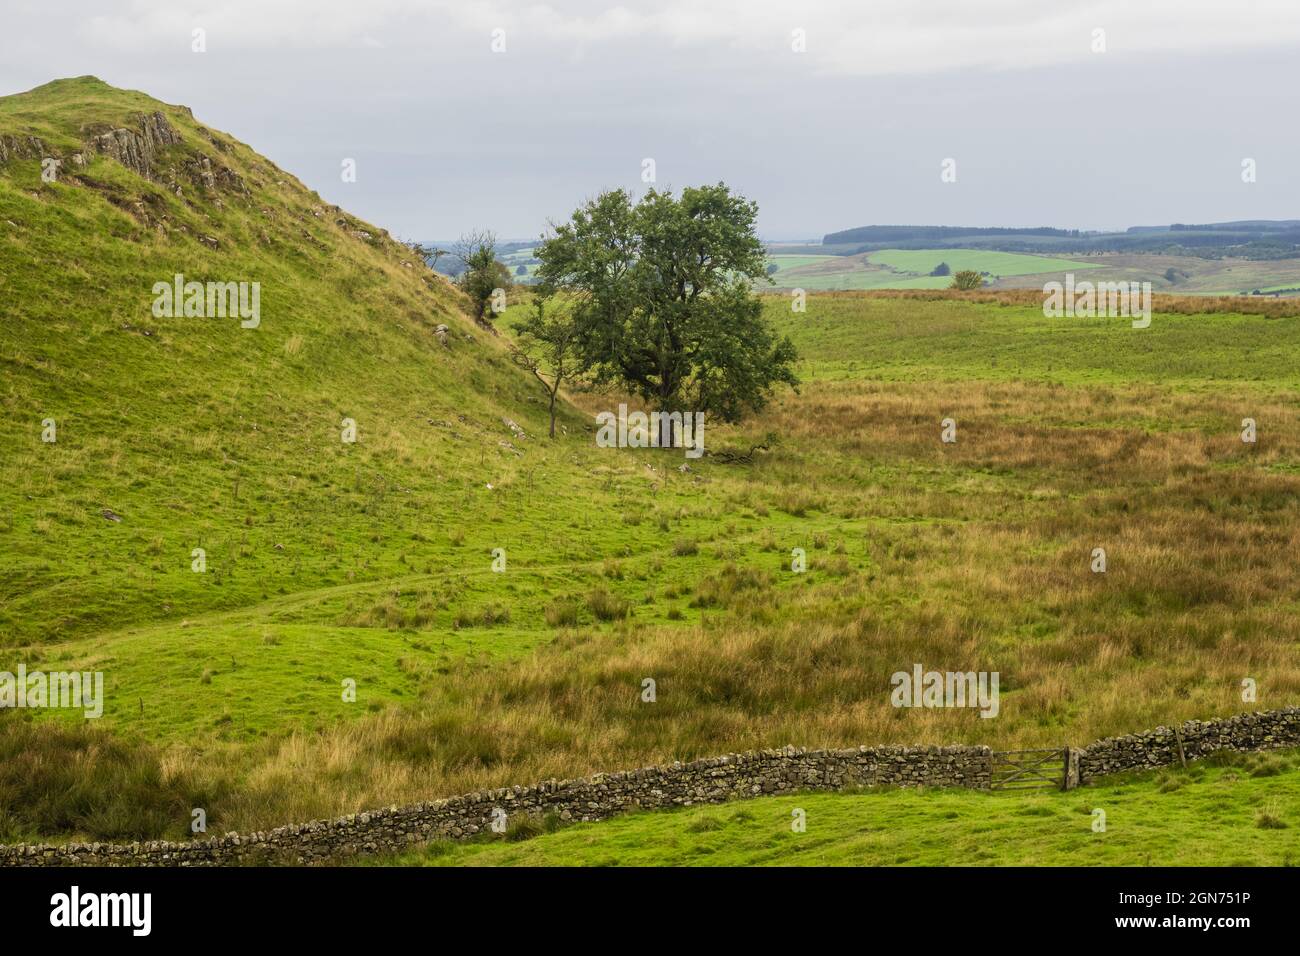 The Hadrian’s Wall Path is an 84 mile (135 km) long National Trail stretching coast to coast across northern England, from Wallsend, Newcastle upon Ty Stock Photo